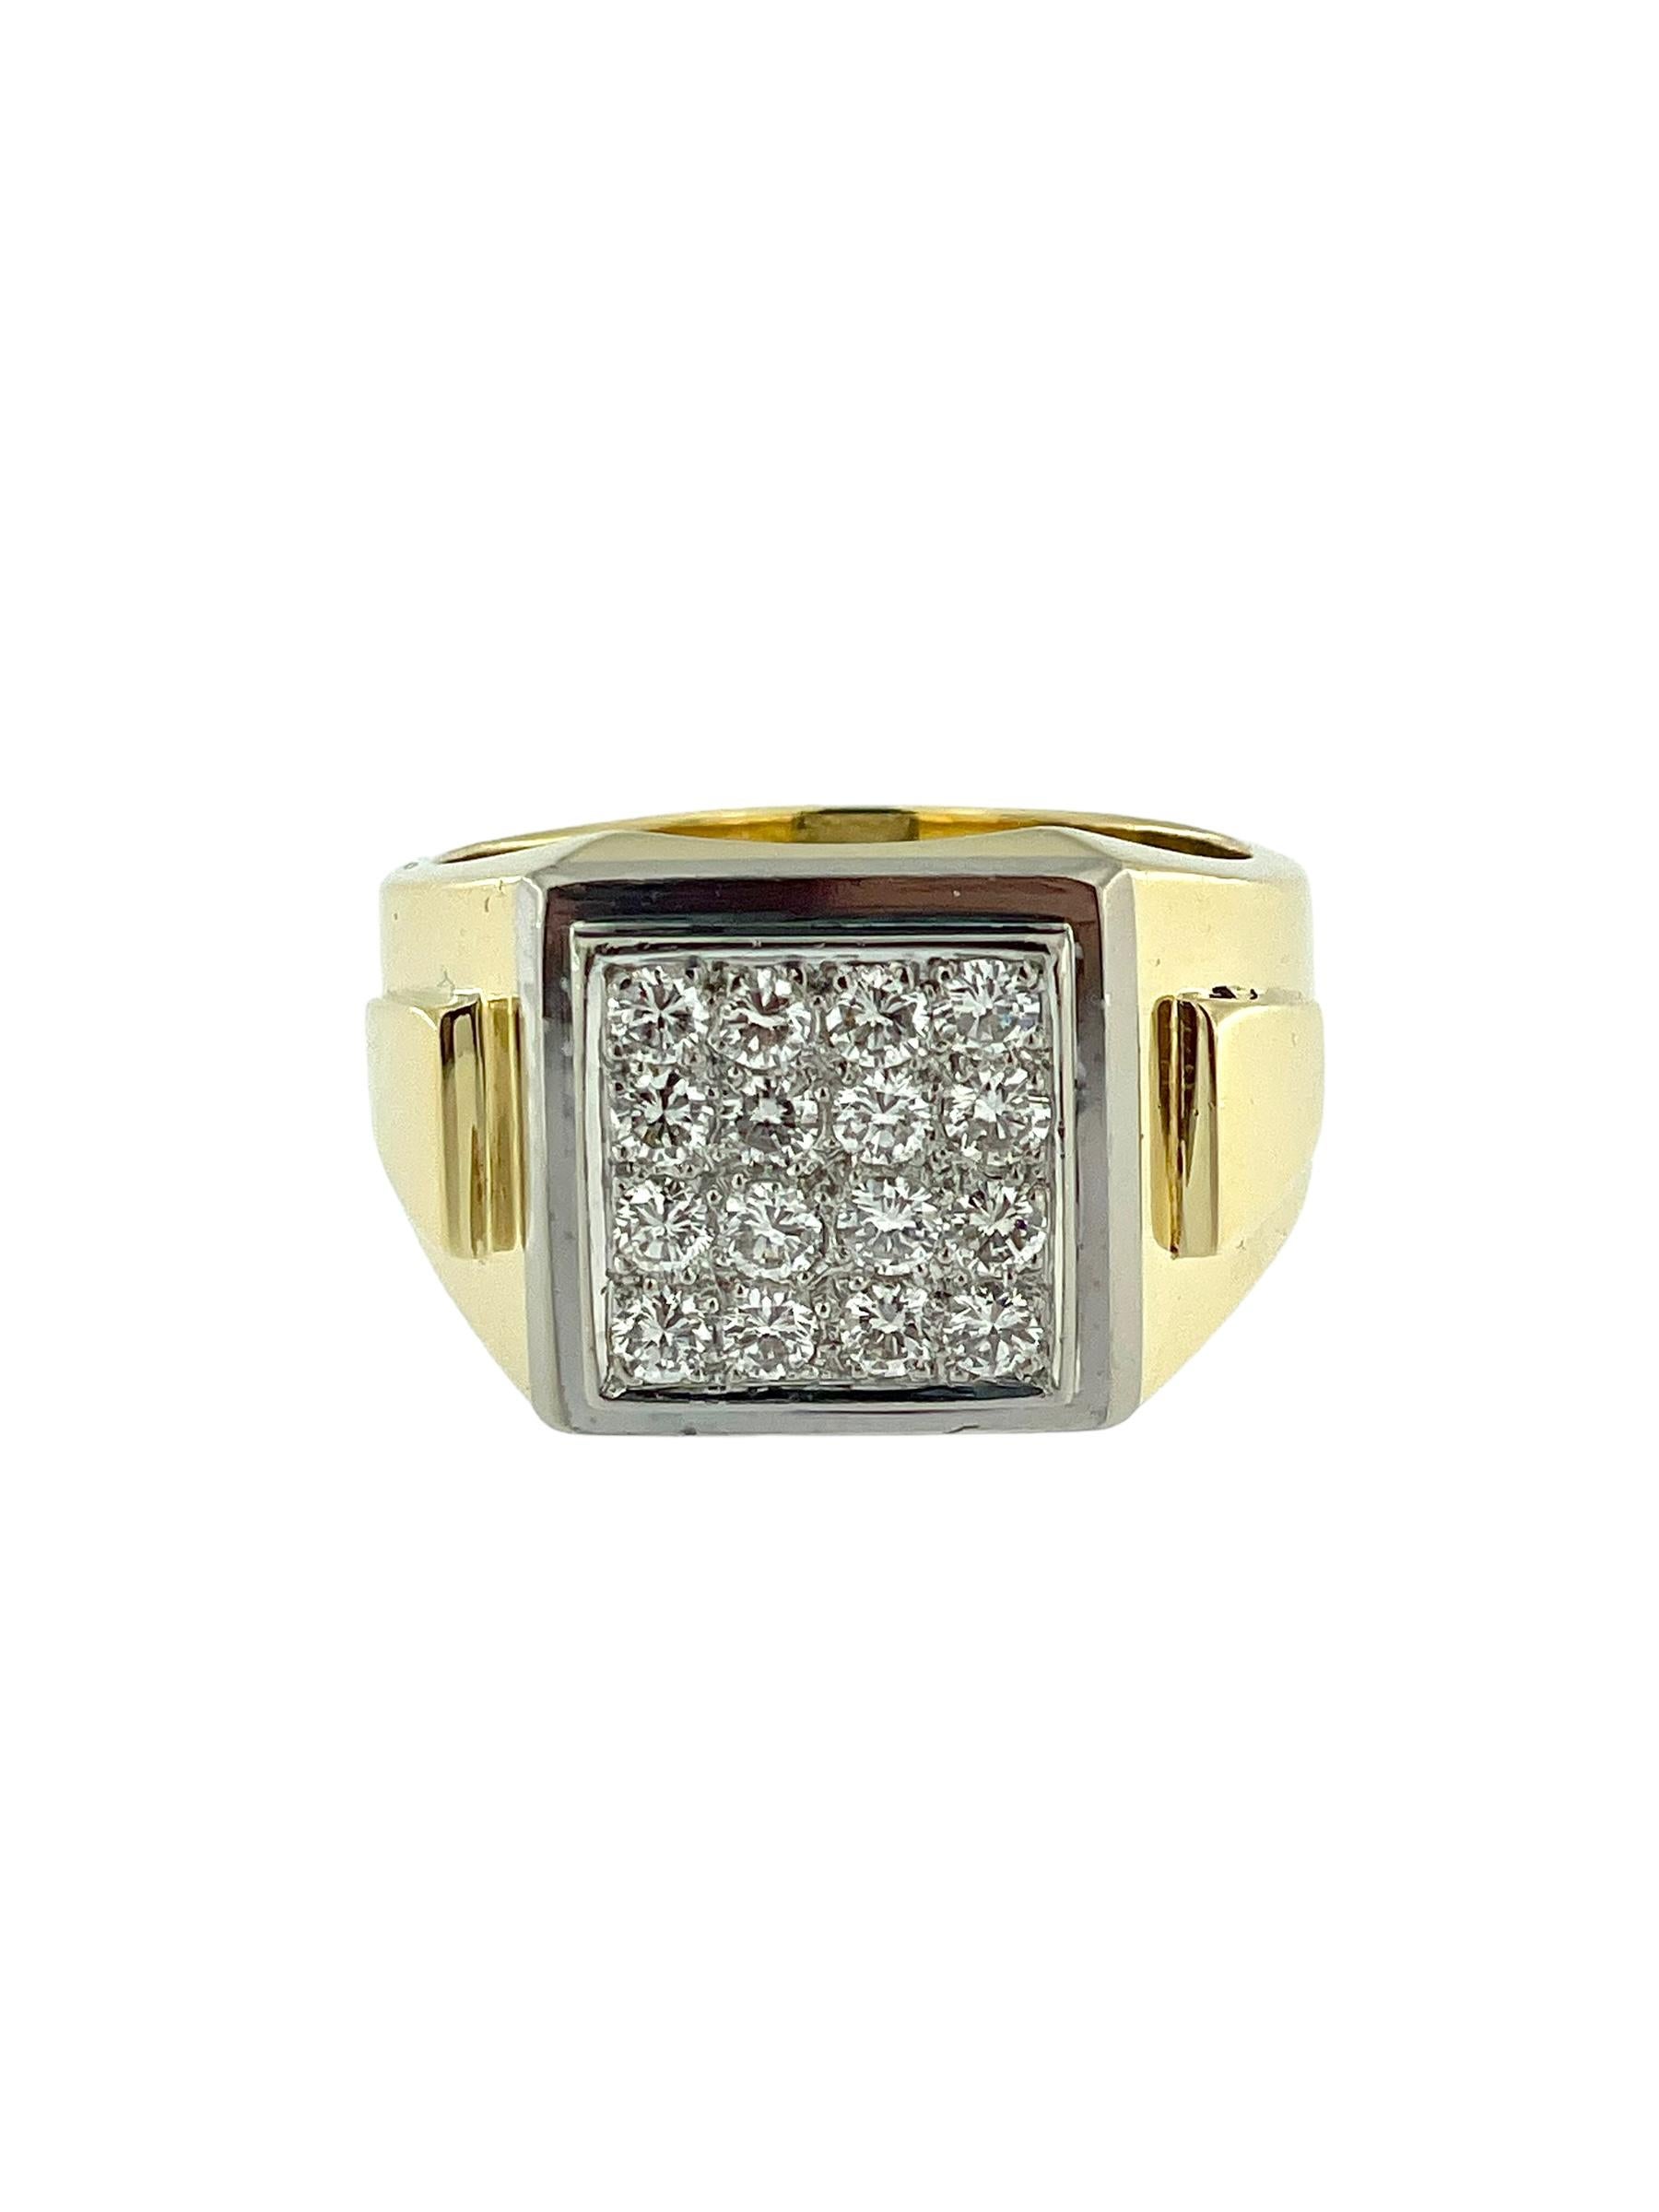 Post-War Vintage Signet Gold and Diamonds Ring HRD Certified  For Sale